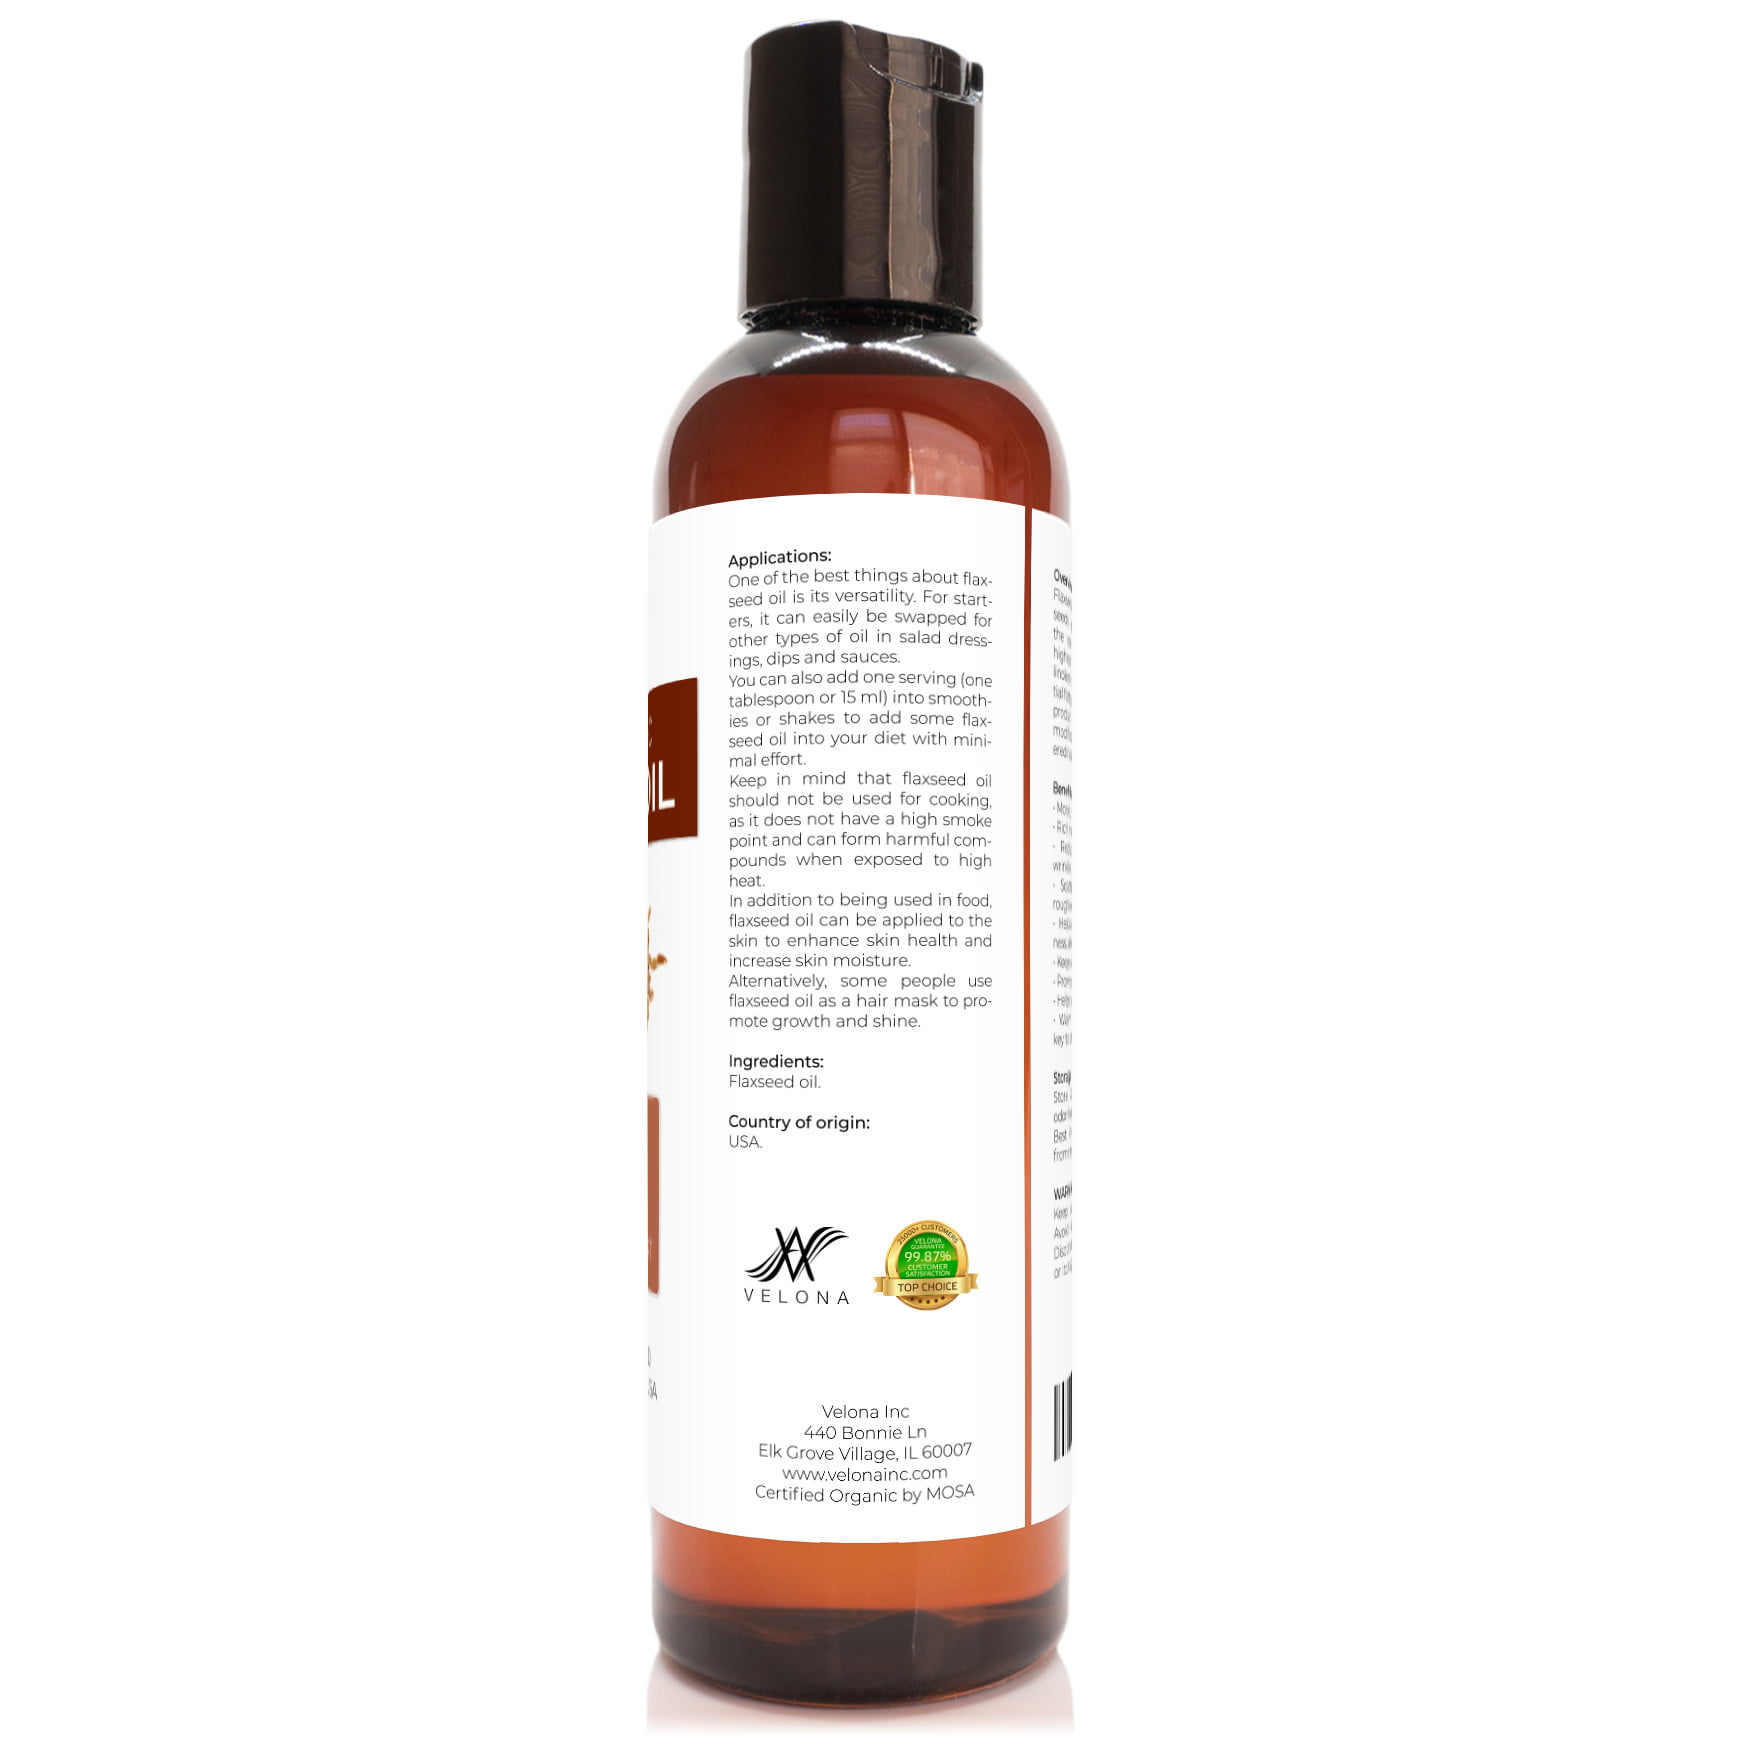 Velona USDA Certified Organic Flaxseed Oil - 4 oz | 100% Pure and Natural  Carrier Oil | Unrefined, Cold Pressed | Hair Growth, Body, Face & Skin Care  | Use Today - Enjoy Results 